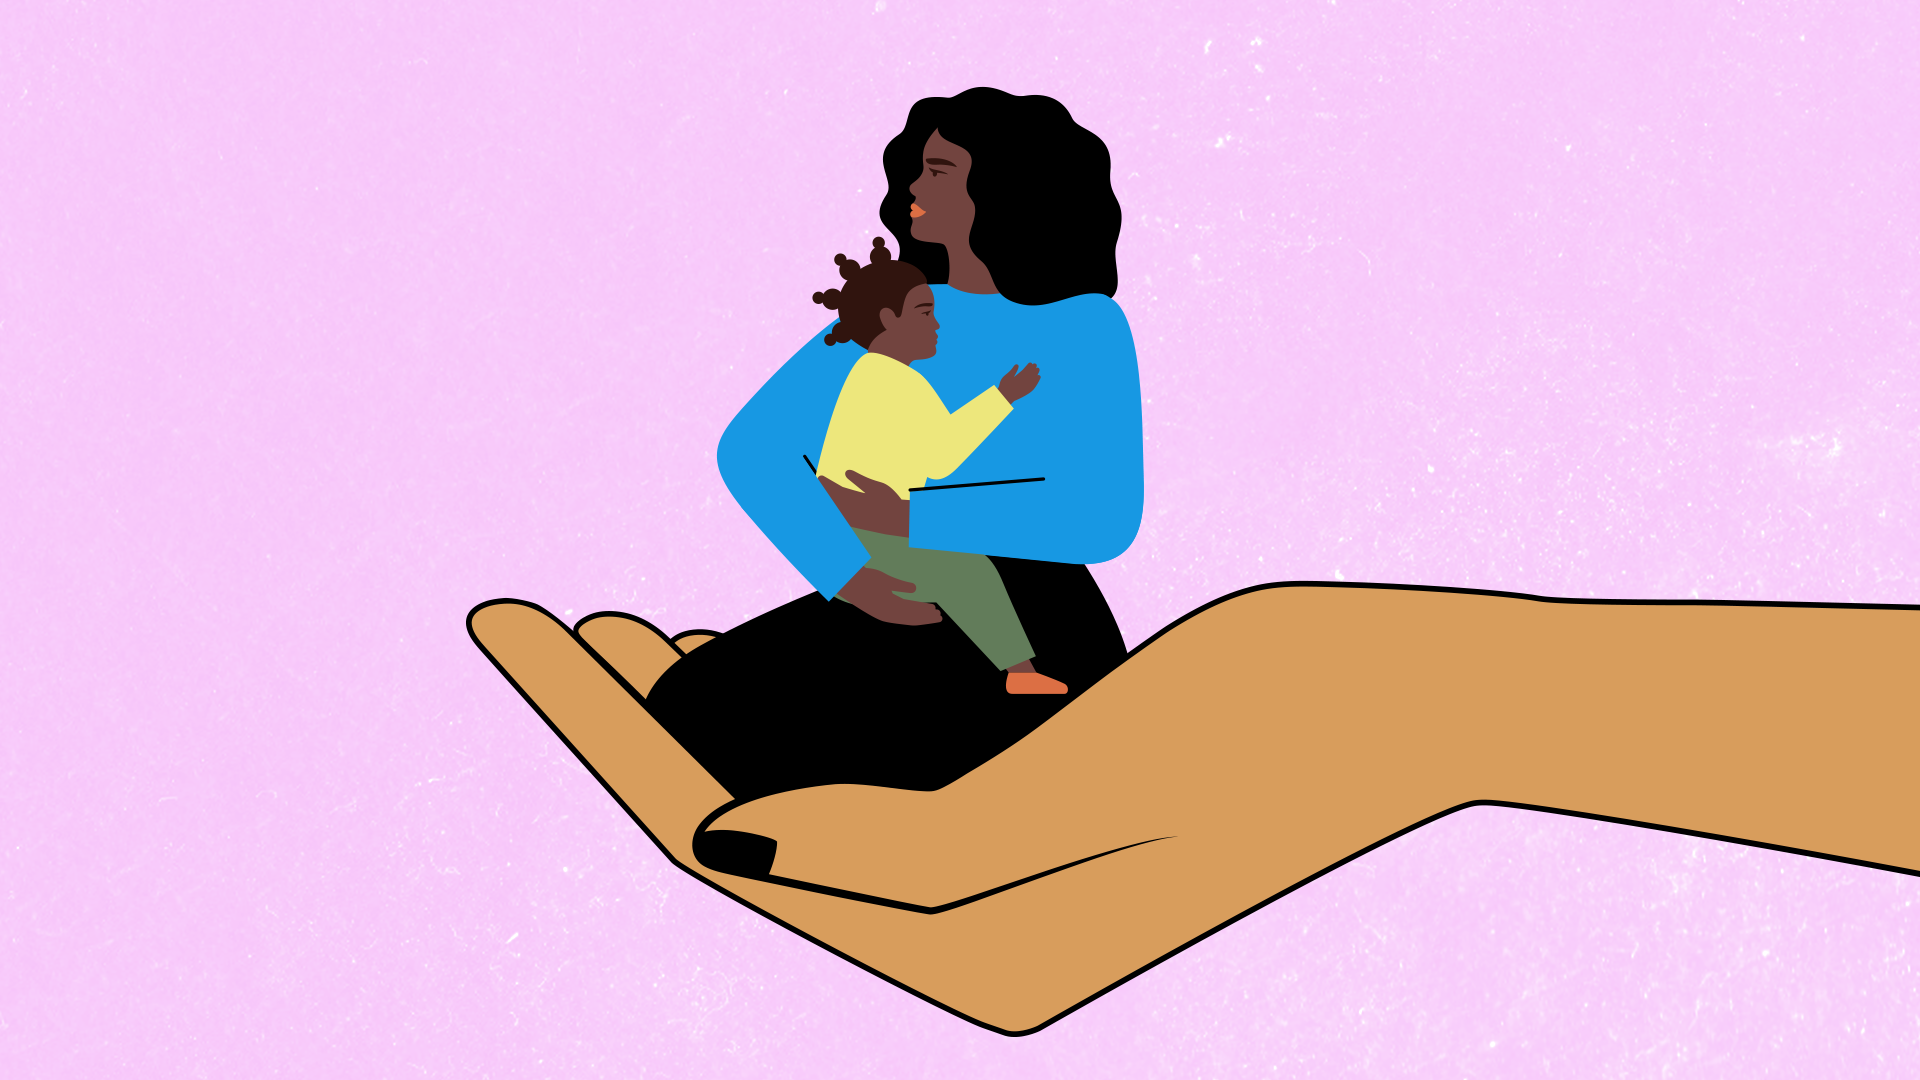 An illustration of a Black woman holding a young child, both being held by a giant hand.